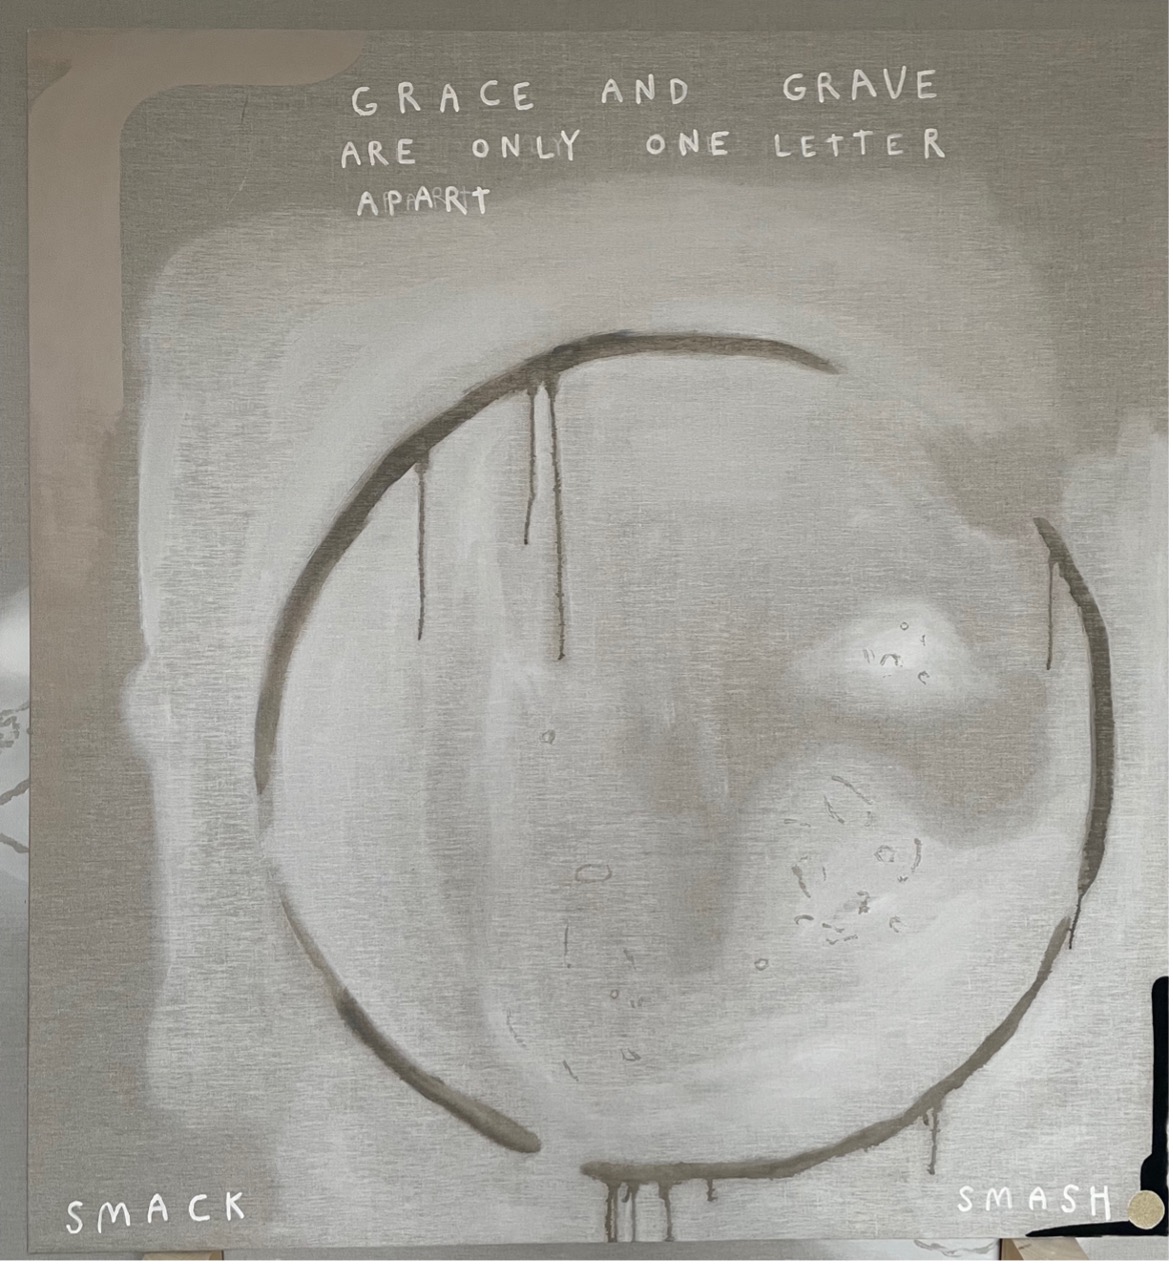 Anouk Lamm Anouk Grace and Grave are only one Letter apart Painting - Anouk Lamm Anouk